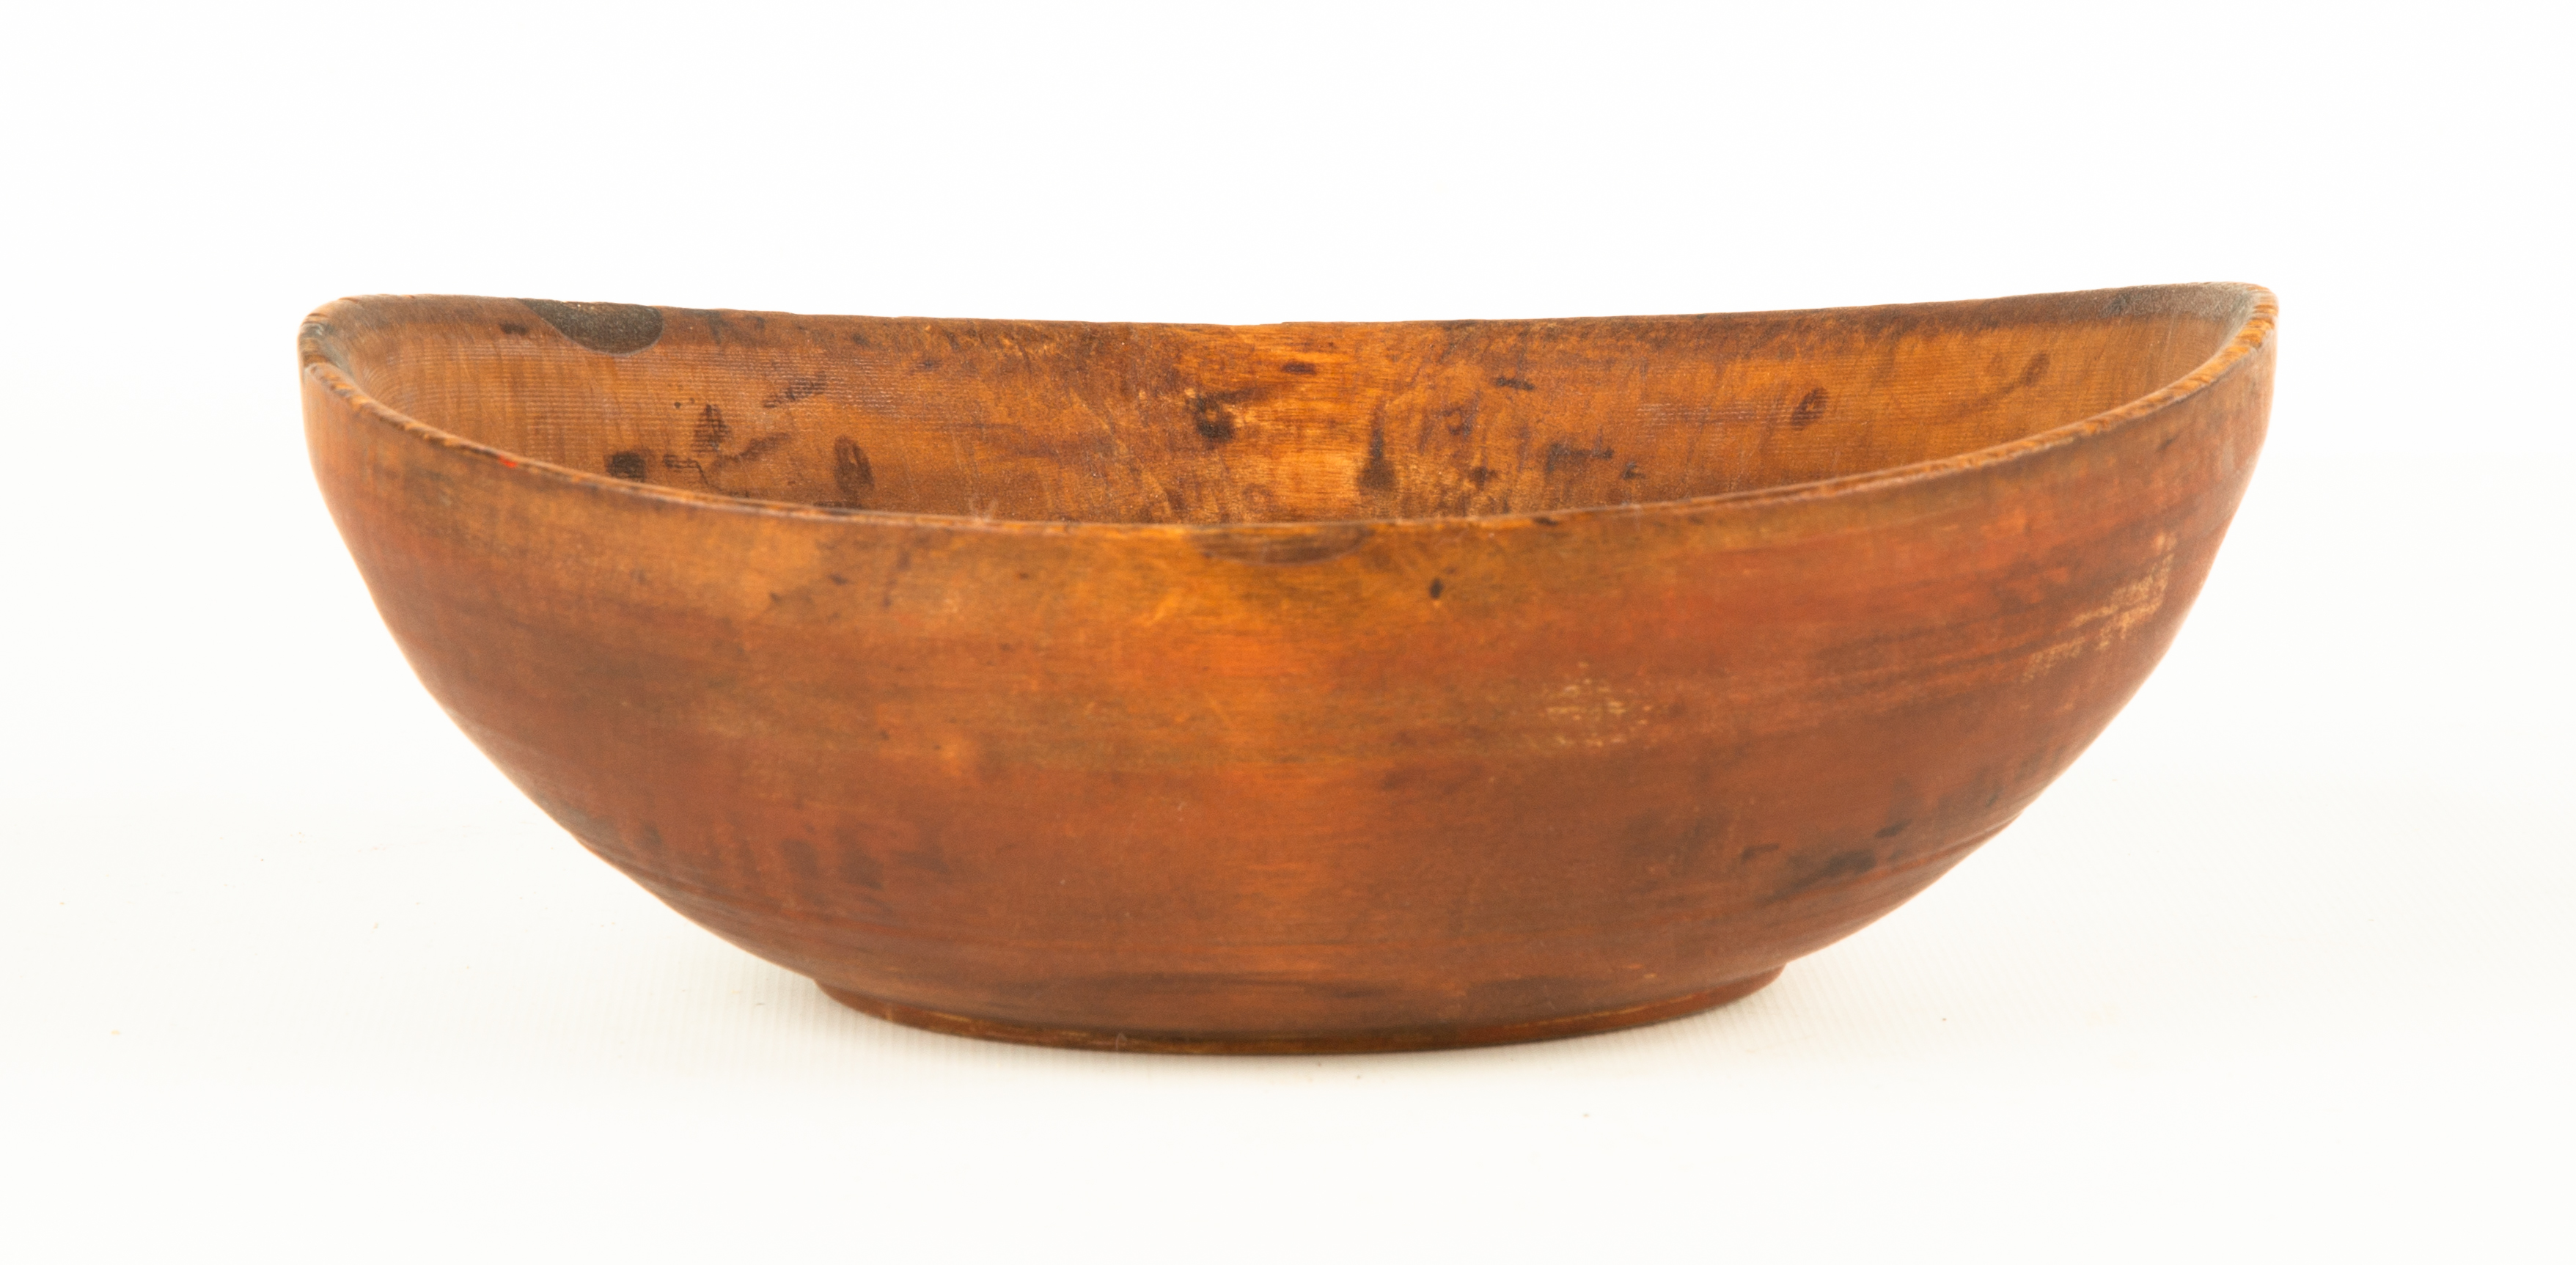 EARLY TURNED WOODEN BOWL Early 353160